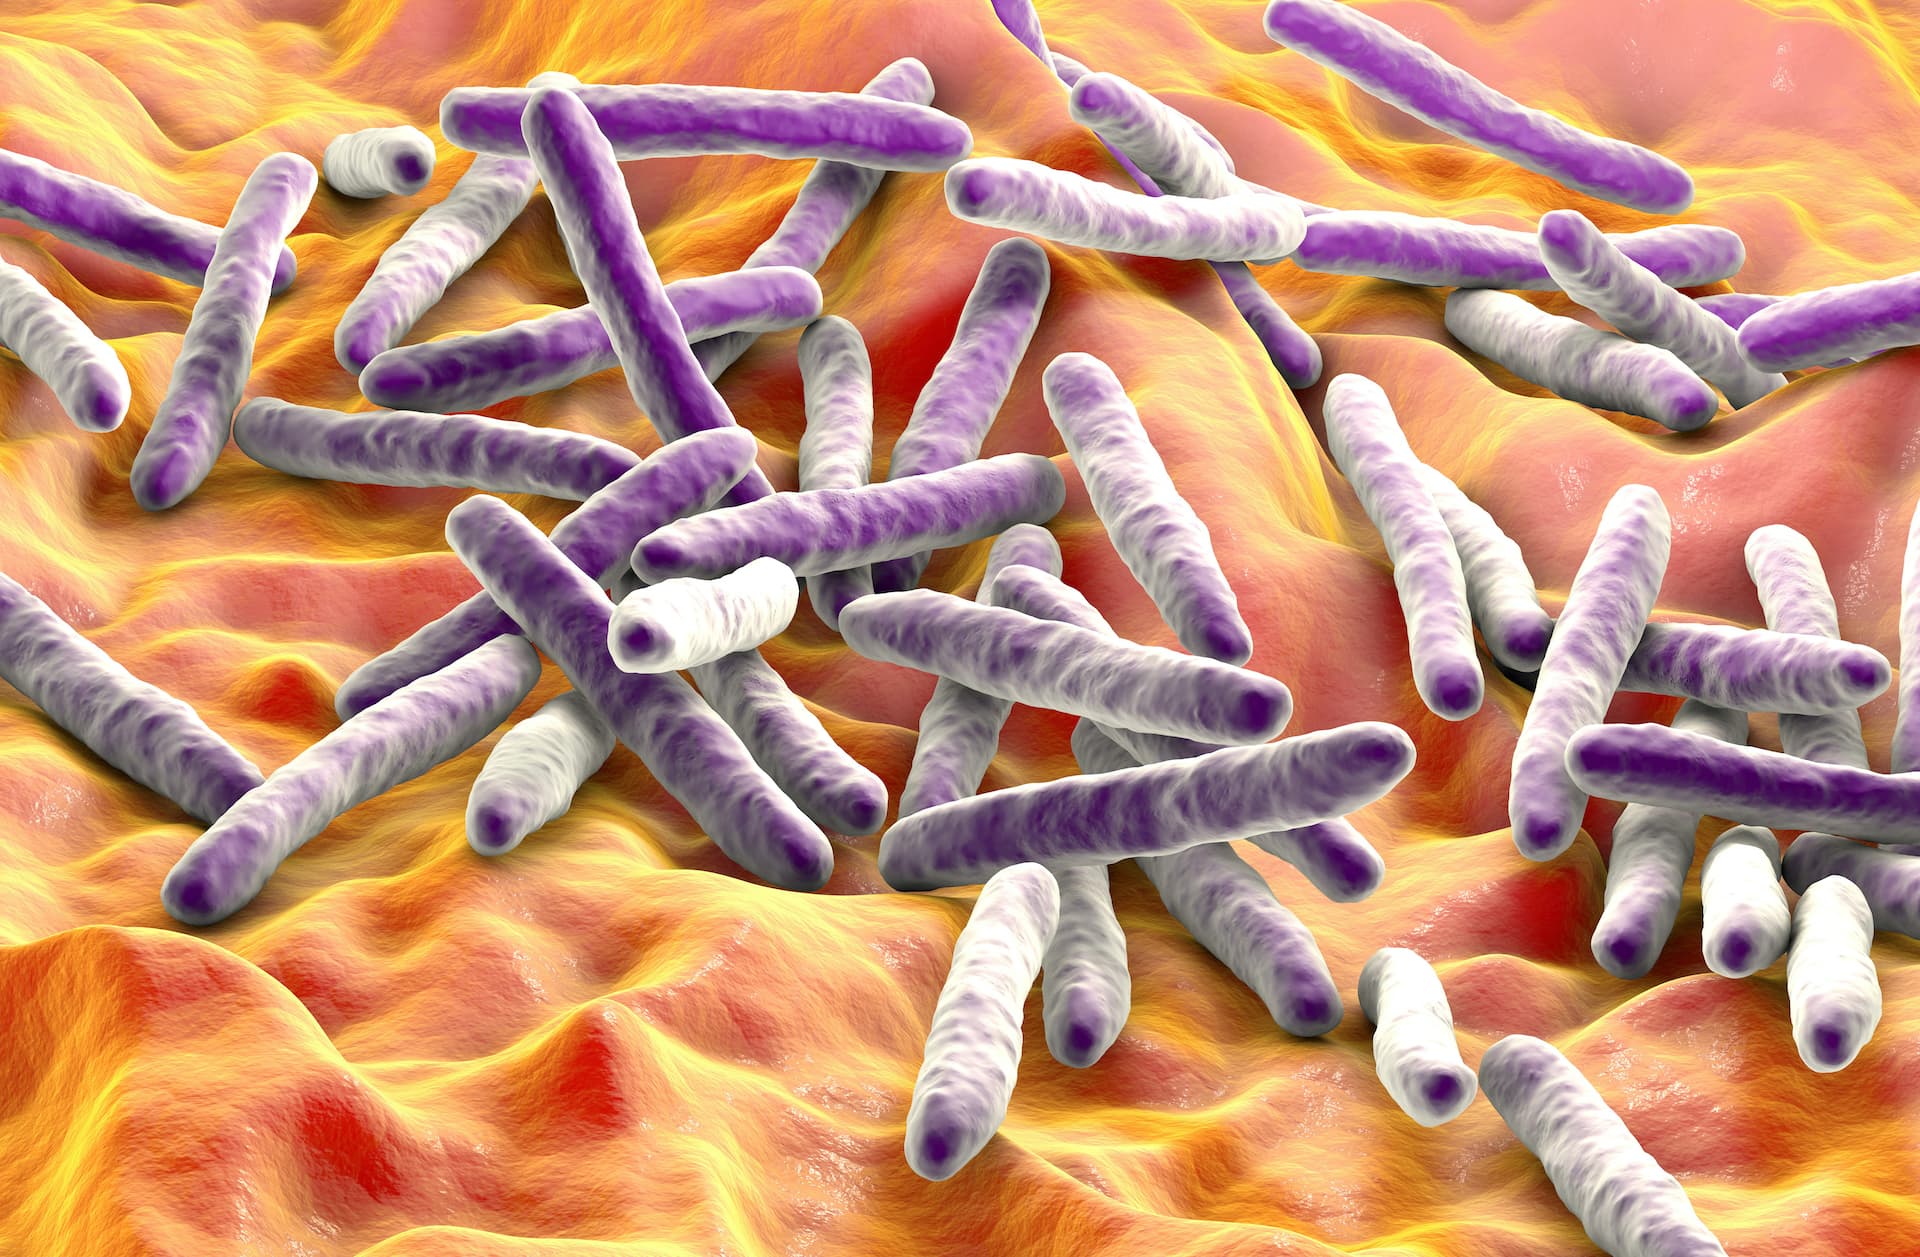  A digital rendering of rod-shaped mycobacteria. Bacteria are shown in 3D. Purple bacteria on an orange background. Licensed for use from Shutterstock.